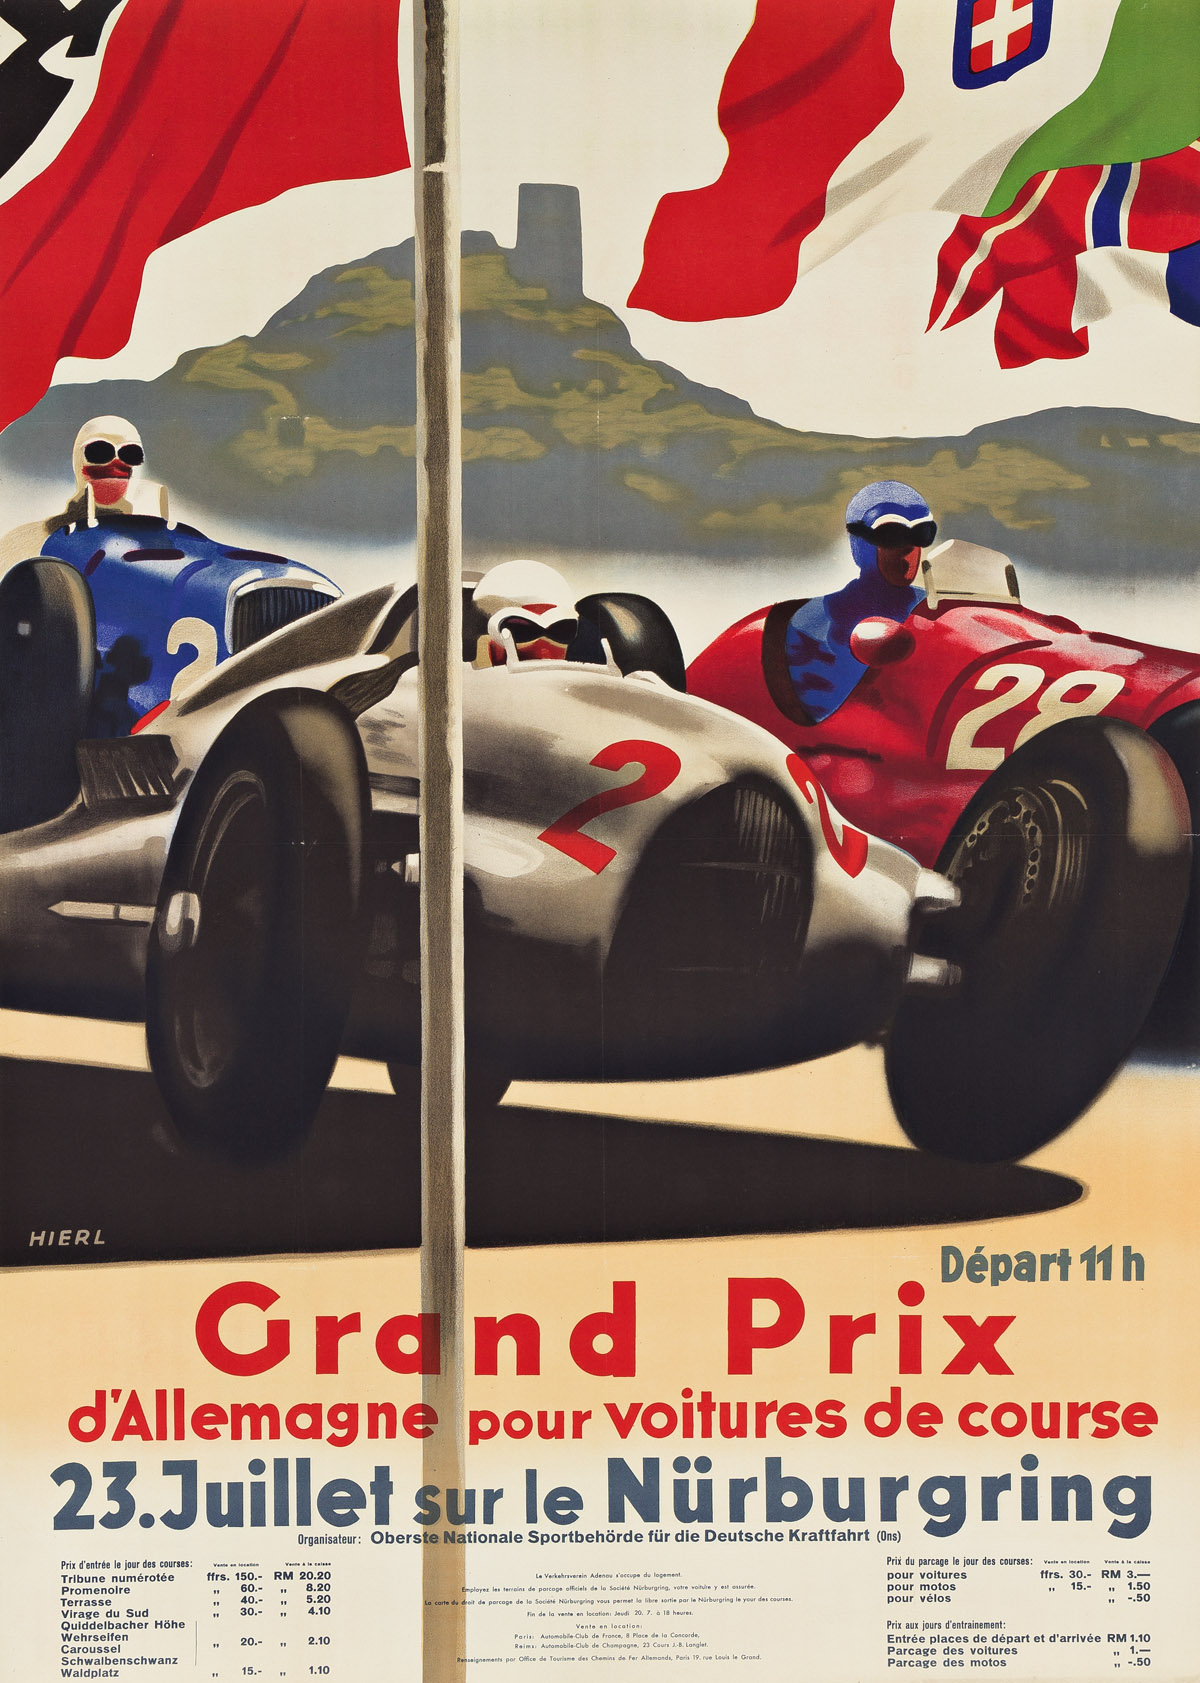 ALFRED HIERL (1910-1950).  GRAND PRIX / NÜRBURGRING. 1939. 46¾x33 inches, 118¾x83¾ cm.